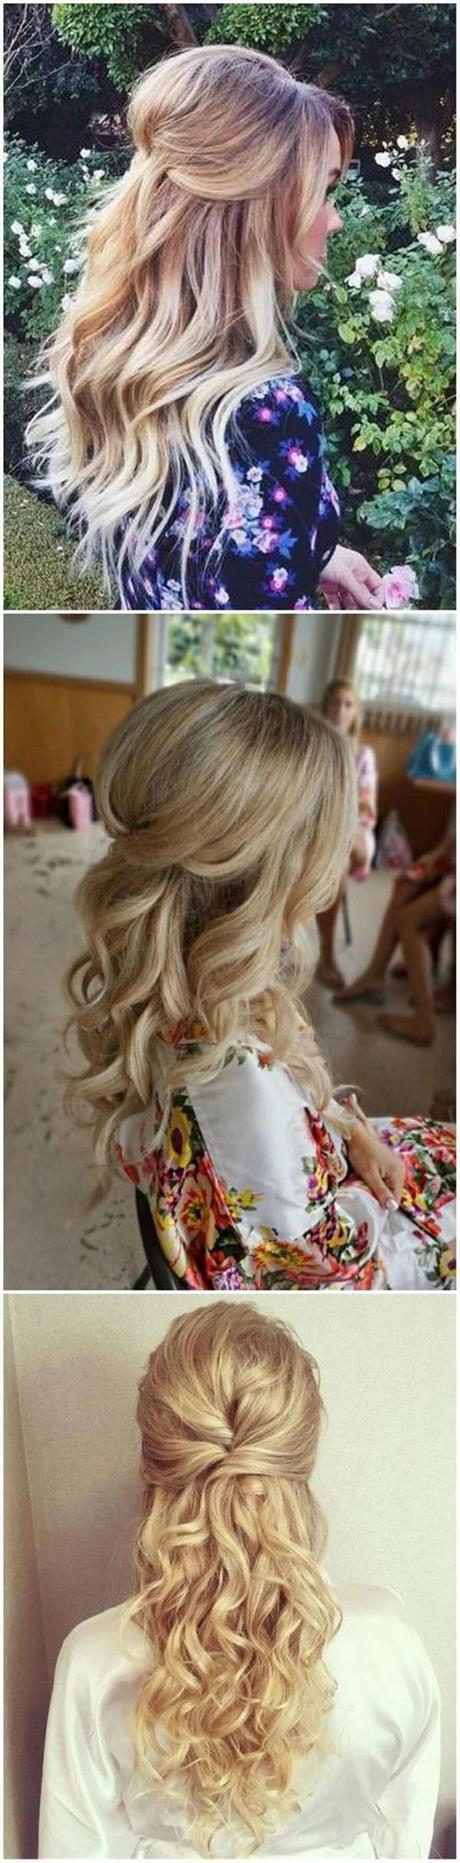 Soft half up and half down hairstyles soft-half-up-and-half-down-hairstyles-08_13